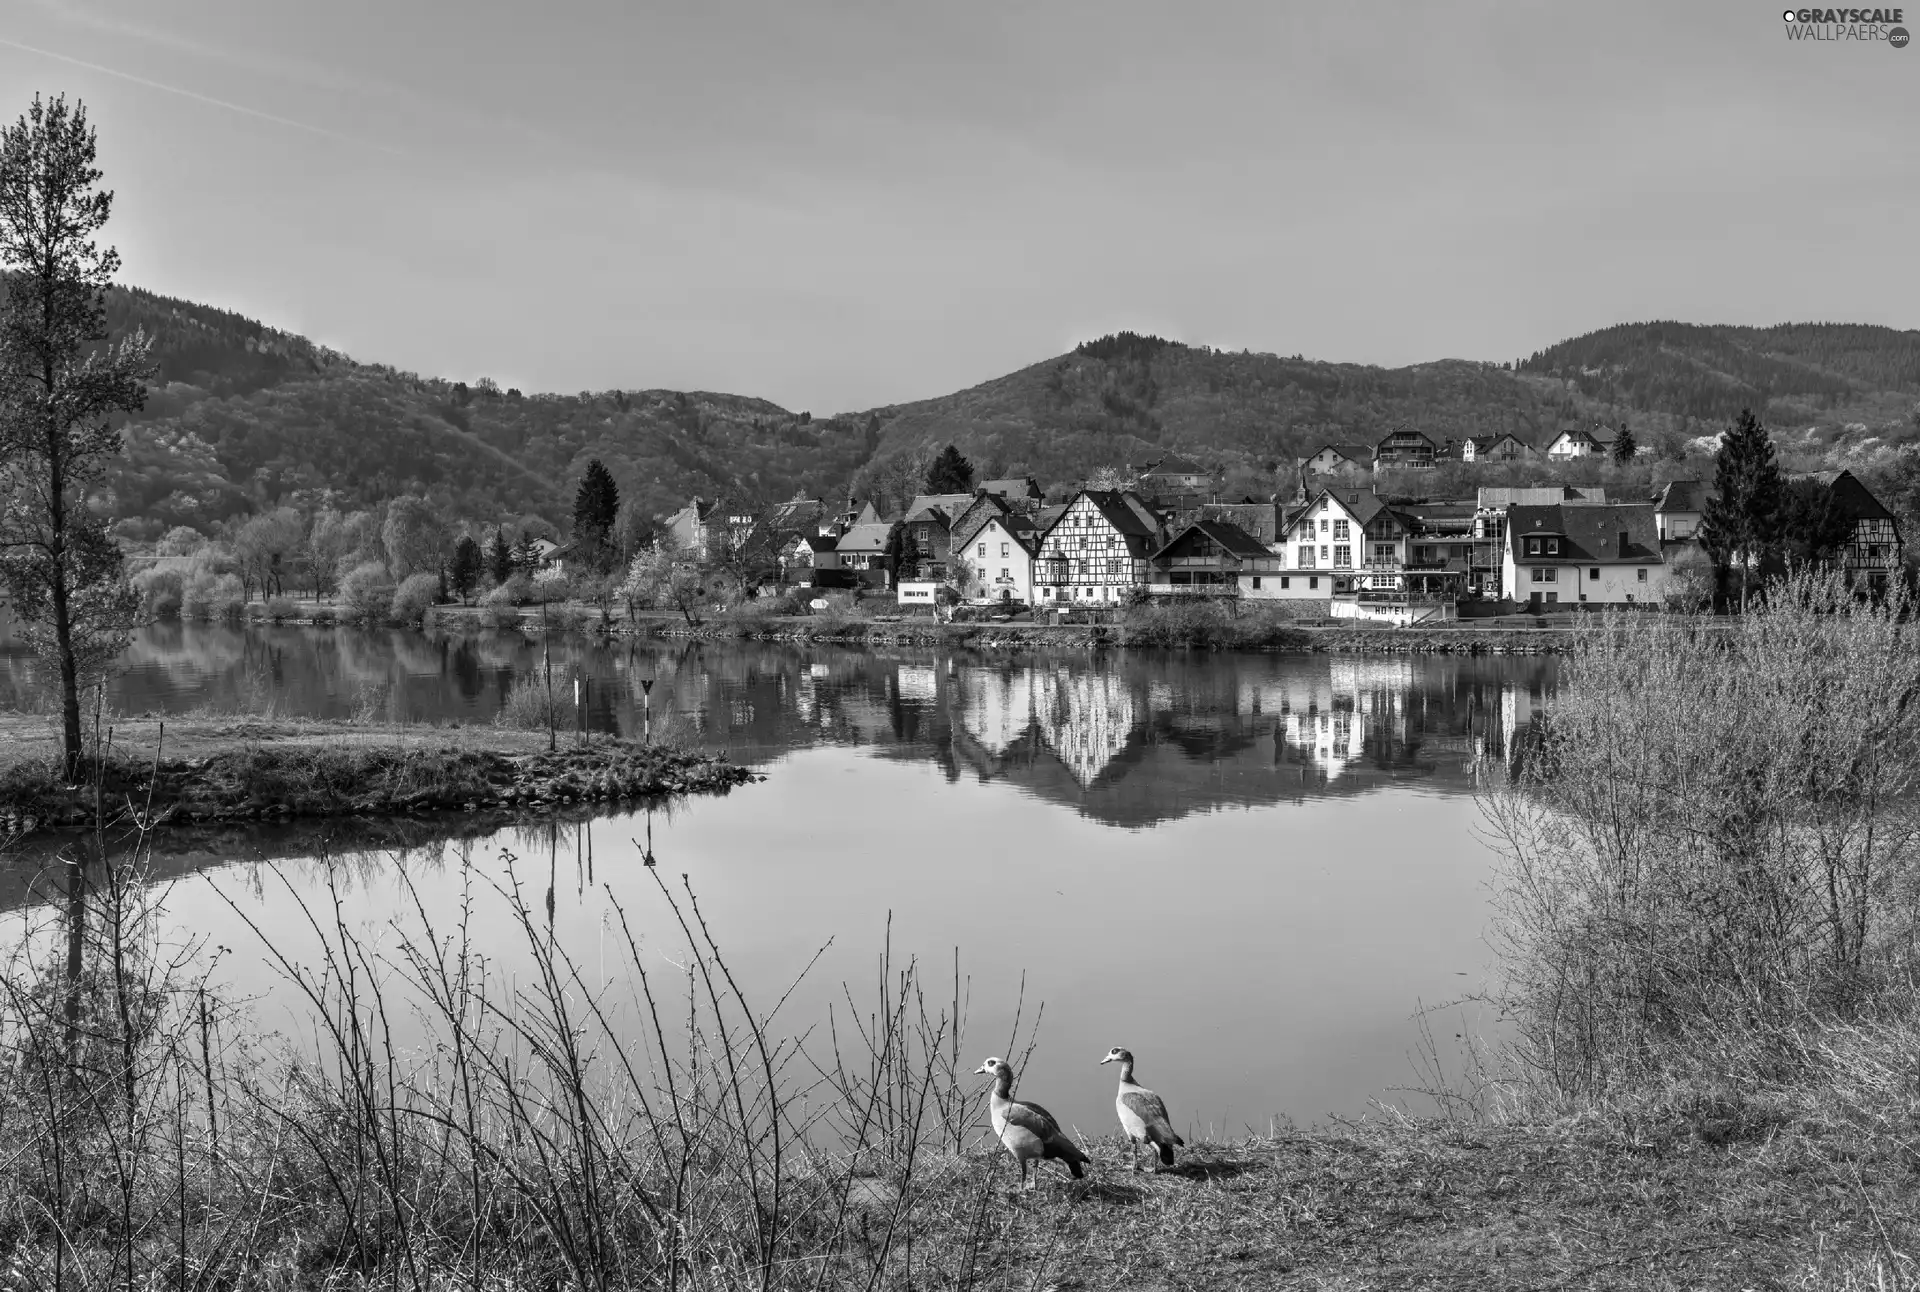 woods, Town, Germany, Mountains, River, ducks, autumn